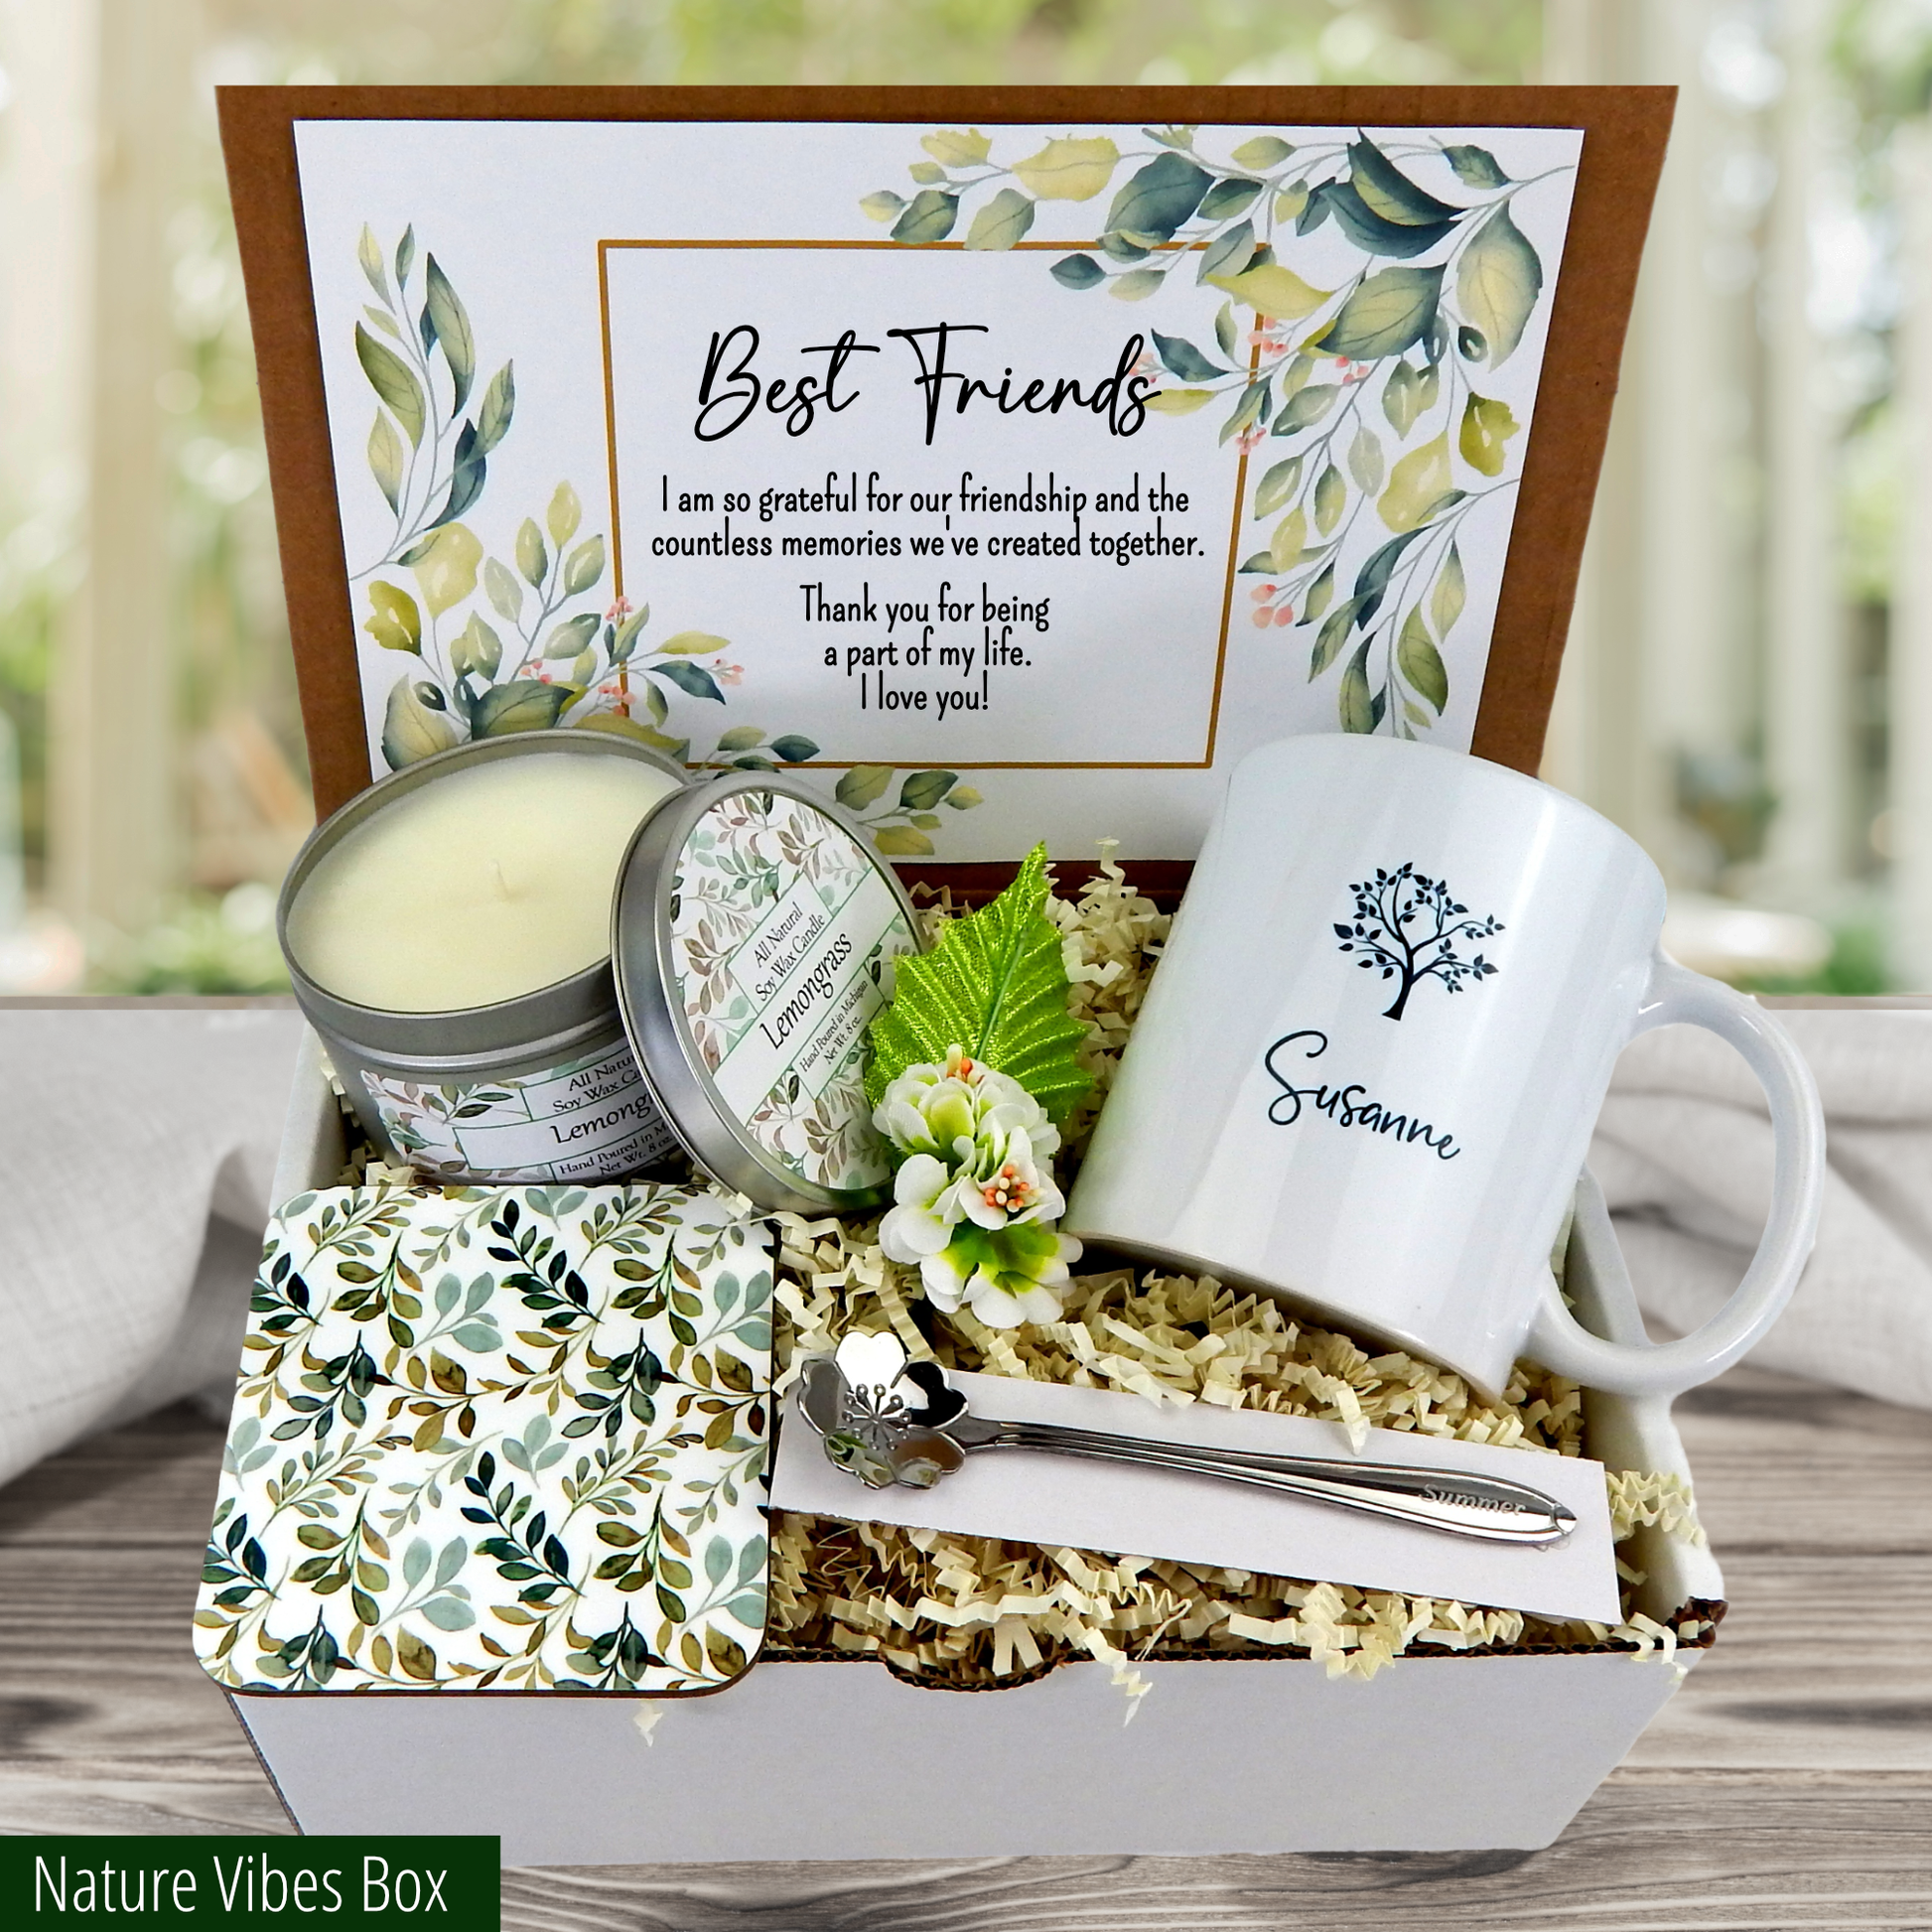 I Love You Holistic Gift Box / Care Package for Women - Gift Good Vibes